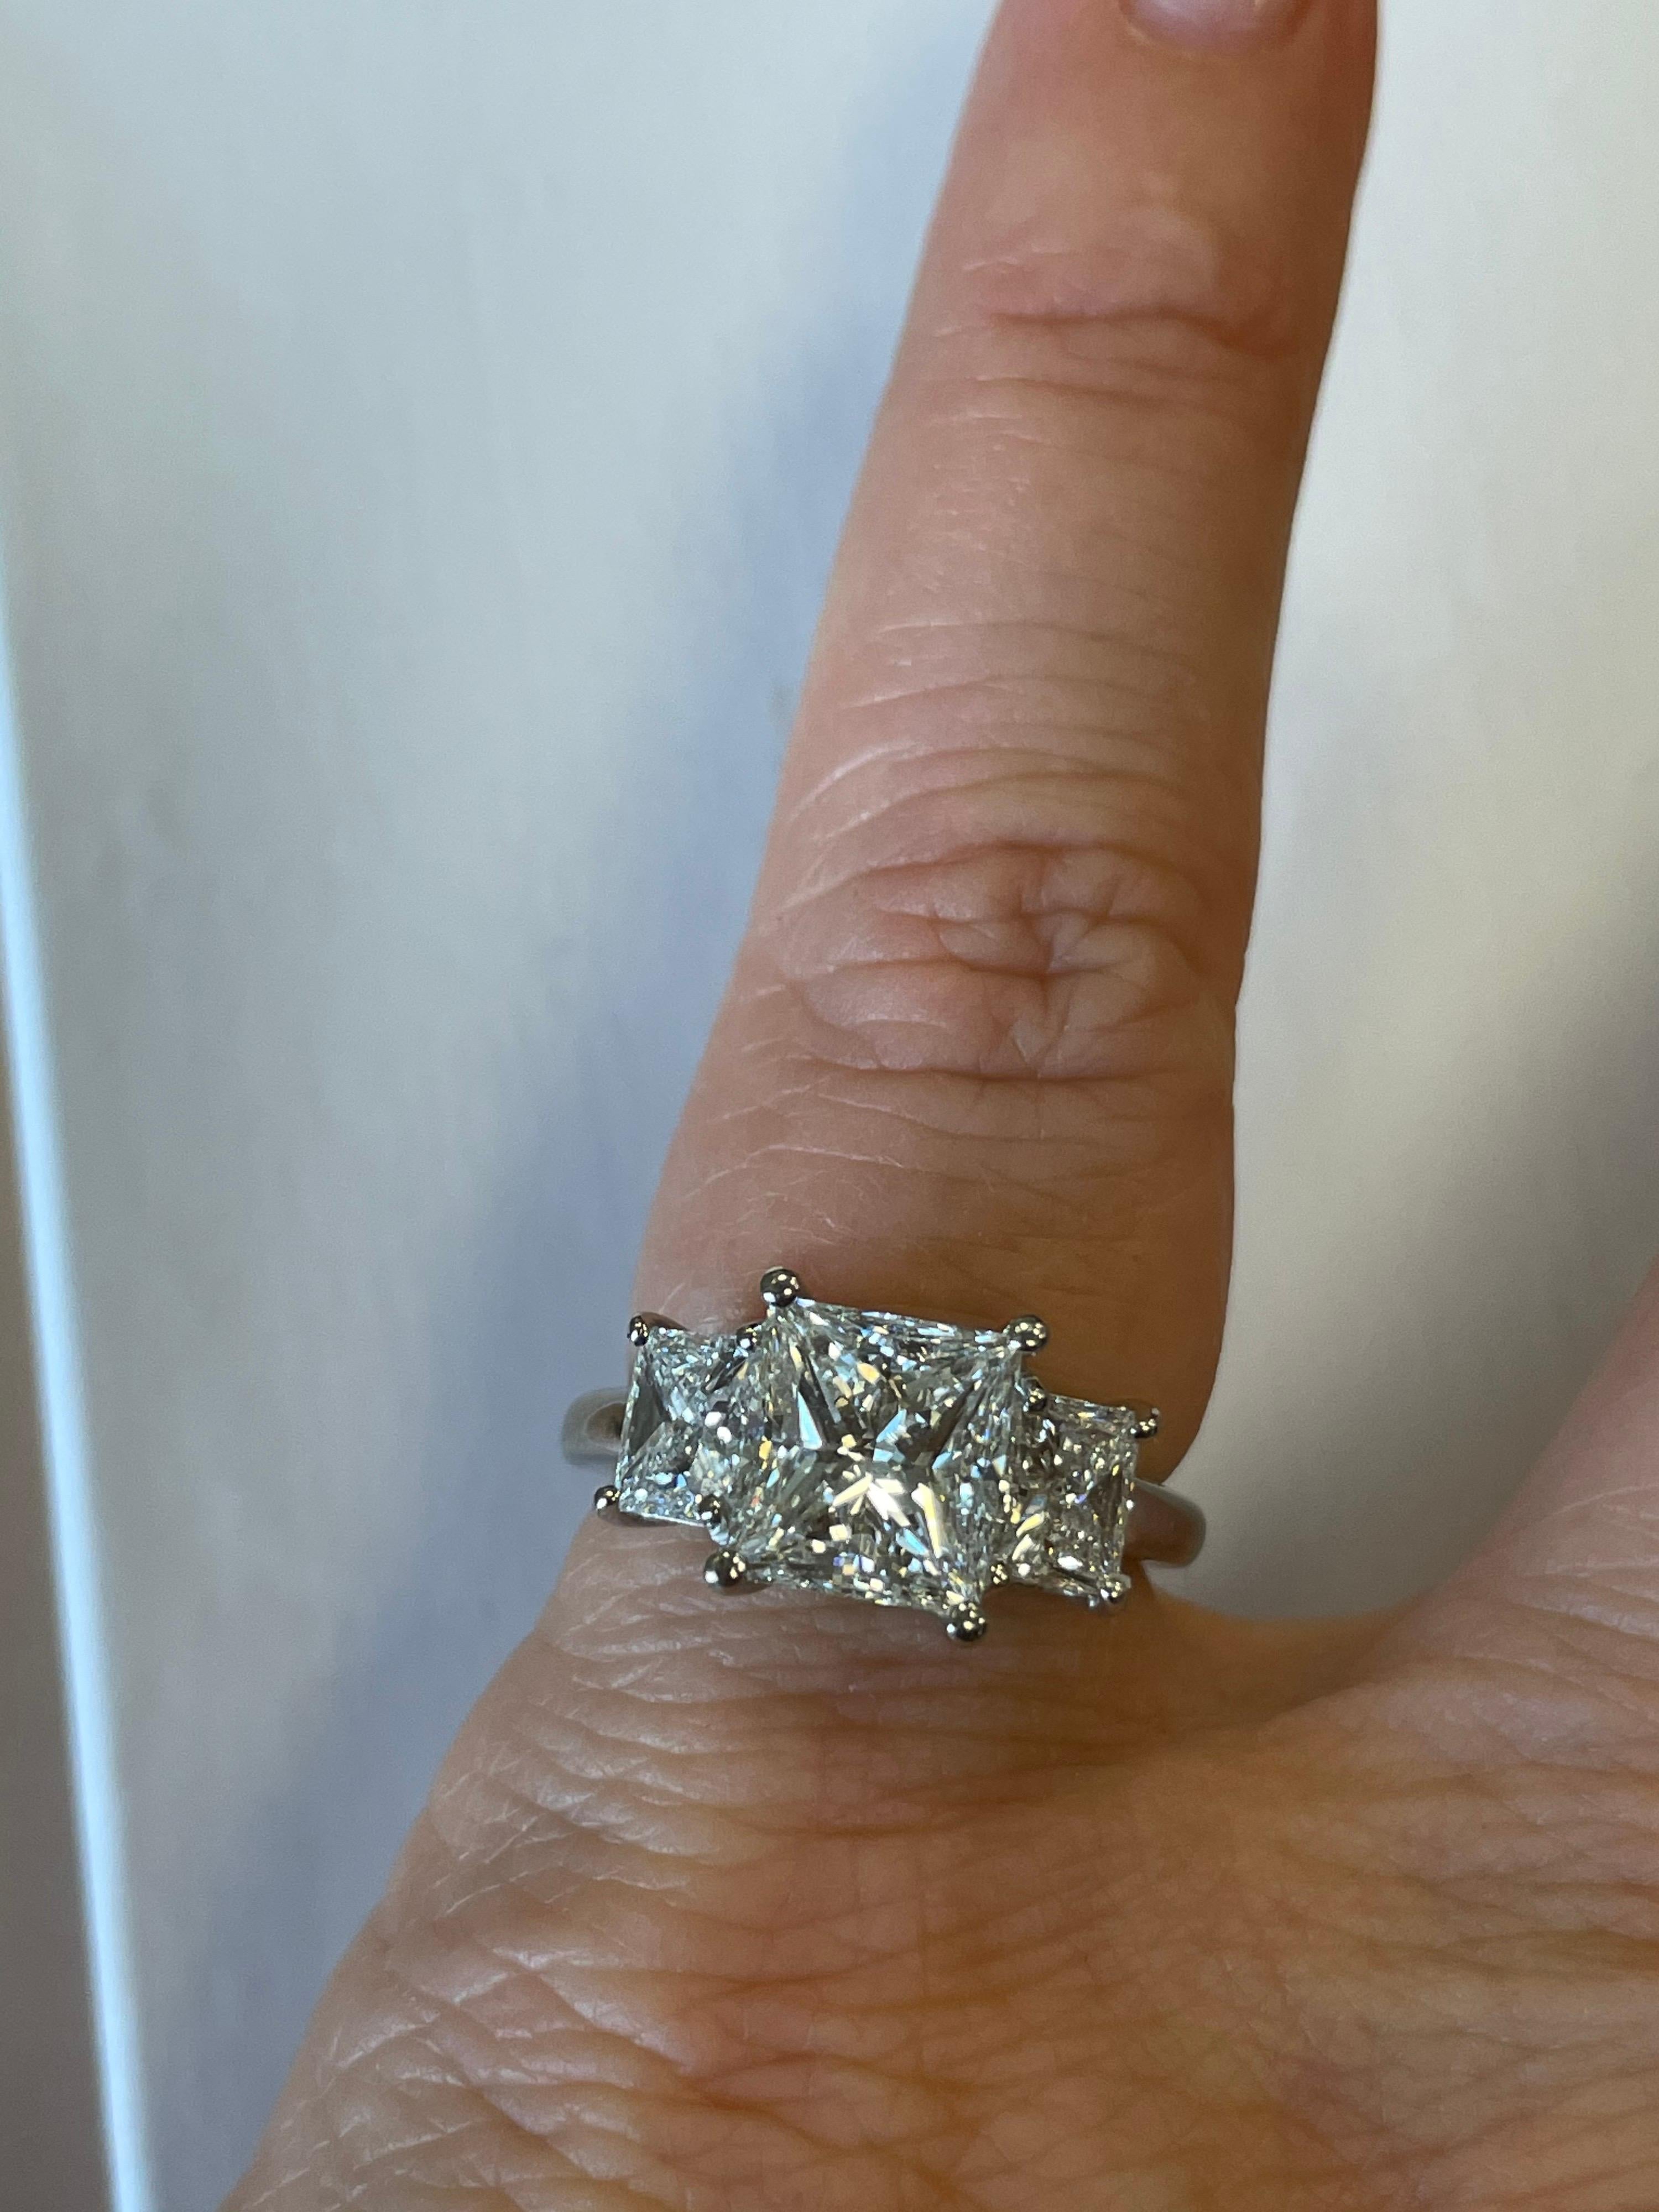 GIA certified Princess cut diamond weighing 2.05cts, G color, VS1 clarity,  prong set in platinum mounting with two matching Princess cut diamonds weighing an additional 1.02cts.
Finger size 6, maybe sized
Retail $38,500